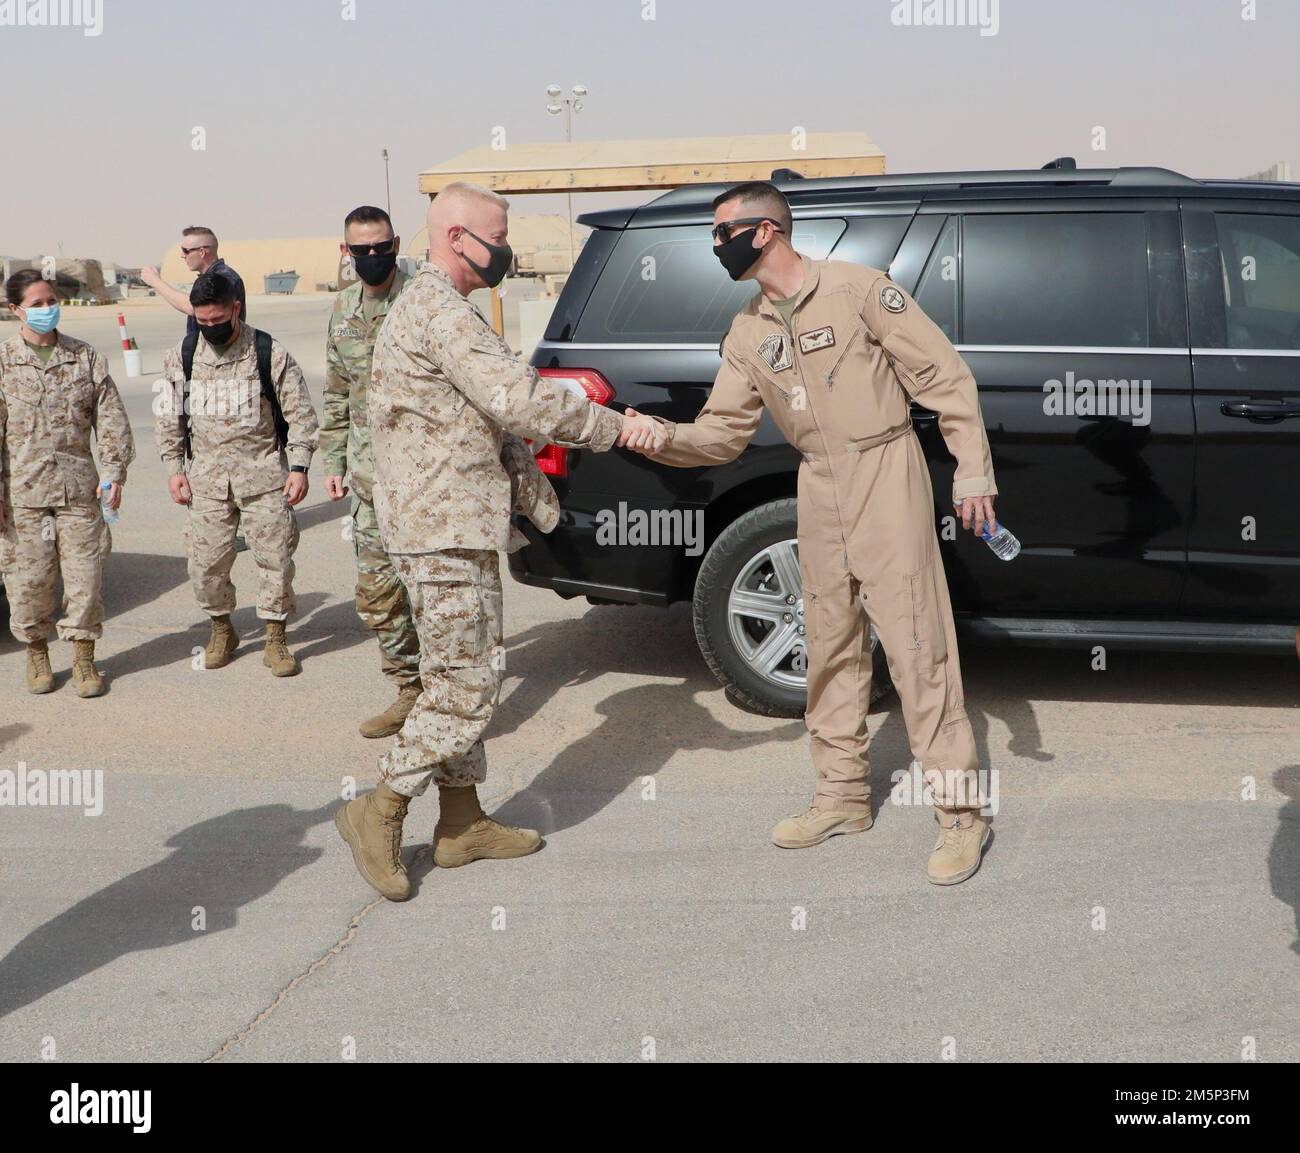 U.S. Marine Corps Maj. Gen. Paul Rock, Commander, U.S. Marine Corps Forces Central Command is greeted by Lt. Col. Timothy Miller, Commander, Marine Fighter Attack Squadron 115 (VMFA-115) during his visit to Prince Sultan Air Base, Kingdom of Saudi Arabia on Feb. 27, 2022. VMFA-115 has been deployed to Prince Sultan Air Base in the Kingdom of Saudi Arabia since December 2021 and are an integral part of the Immediate Response Force in the Central Command area of responsibility. Stock Photo